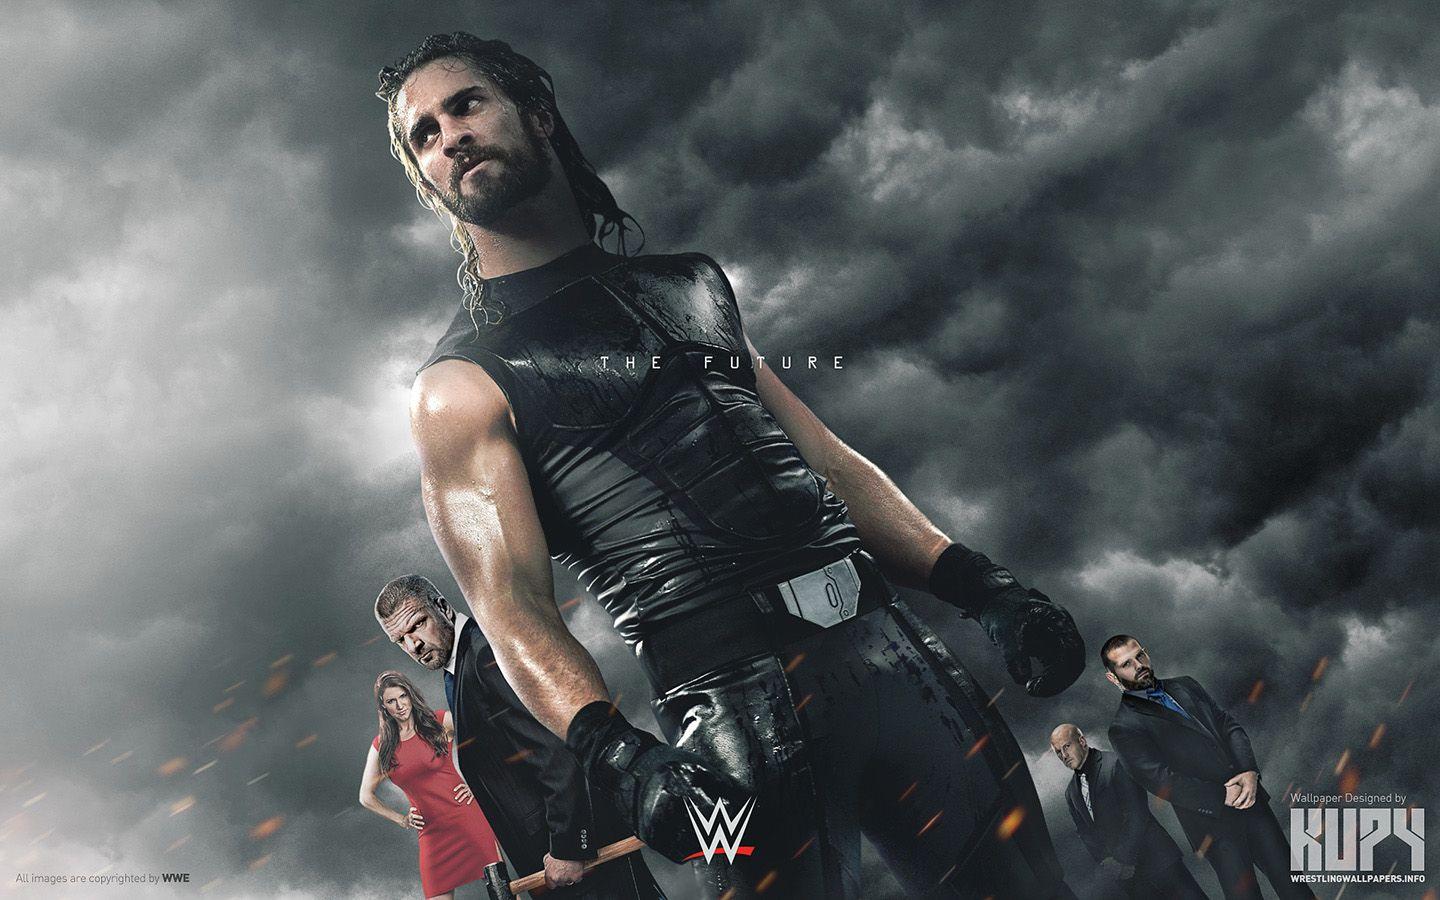 WWE image Seth Rollins Future HD wallpaper and background